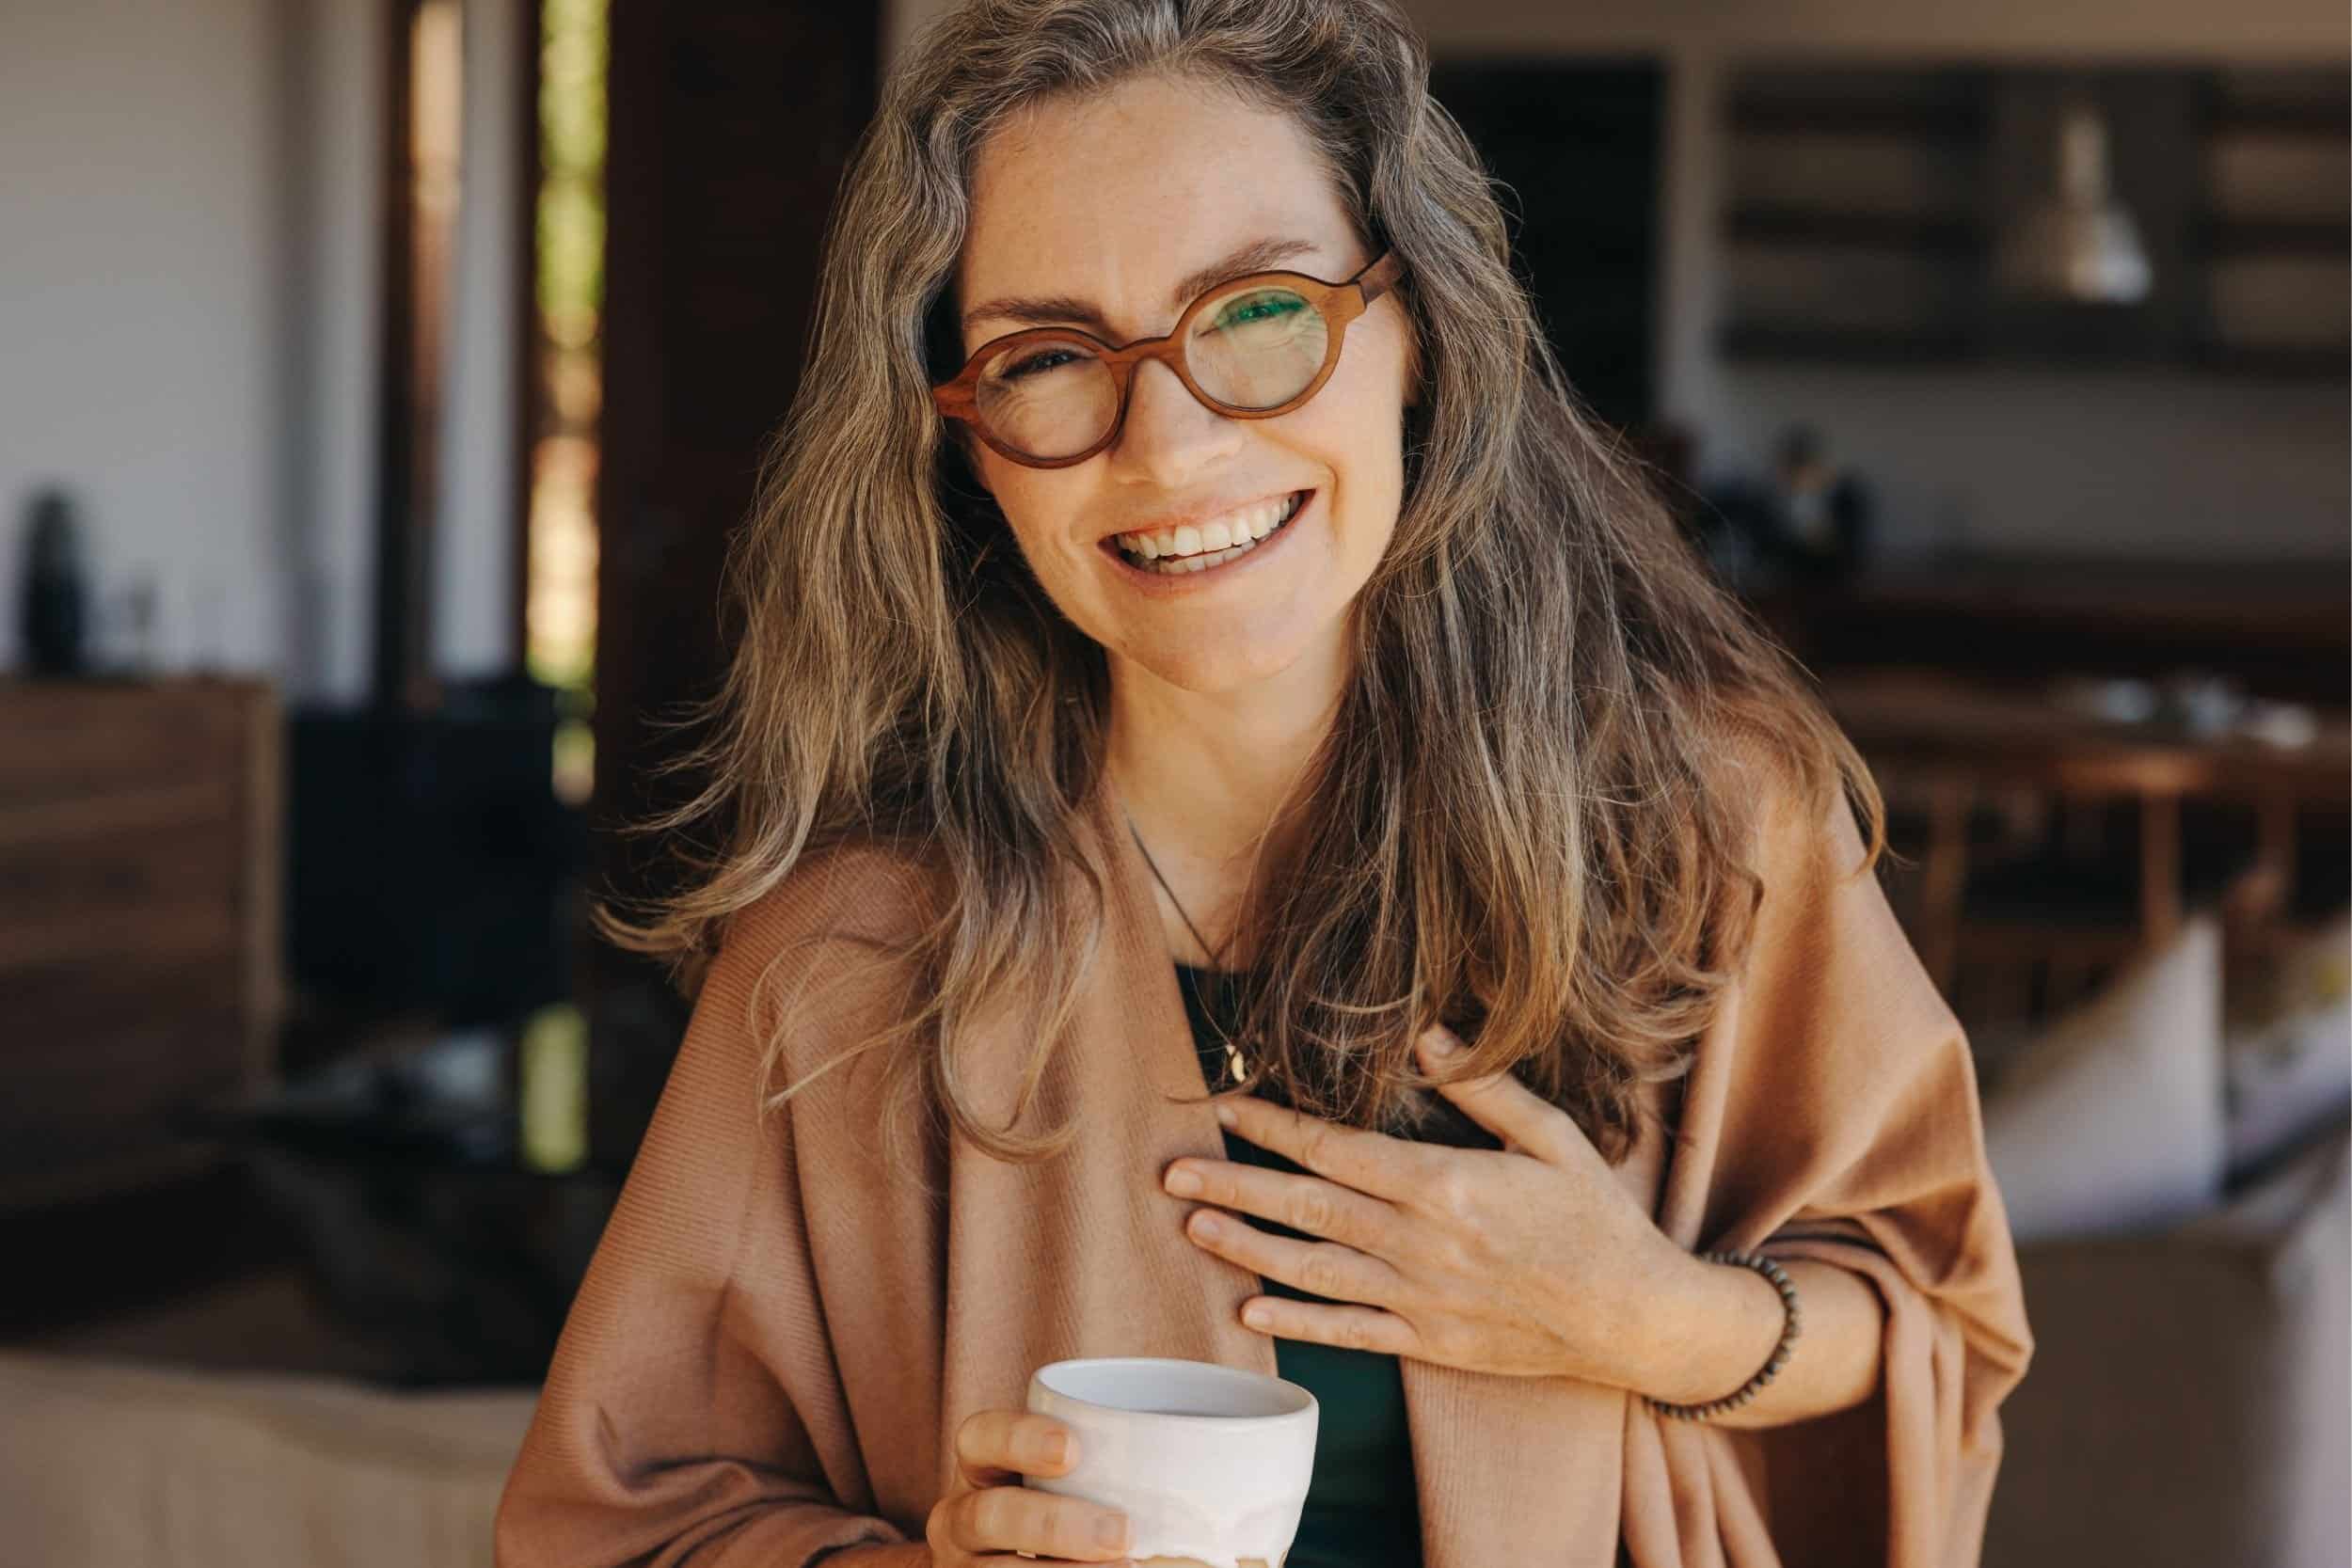 woman in her 40s widely smiling holding a cup of coffee